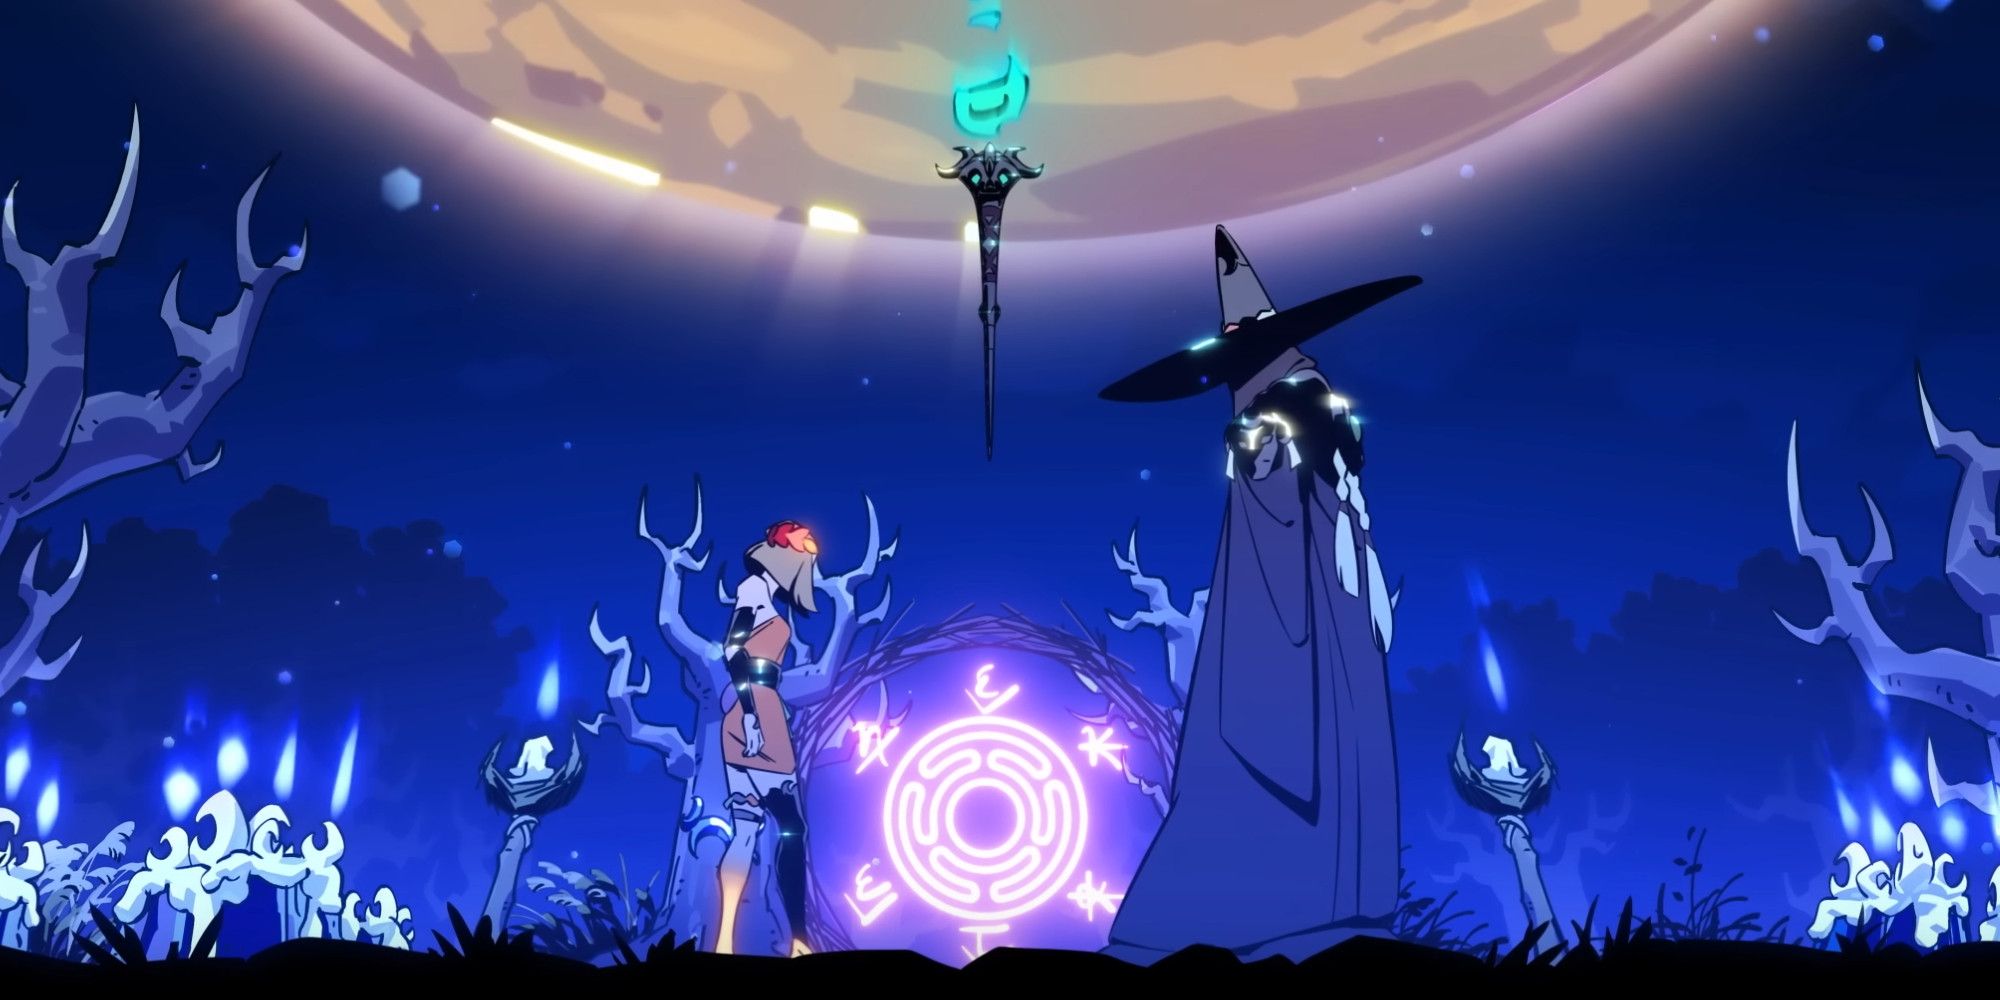 Hades 2 main character and a wizard standing in front of a portal underneath a large moon